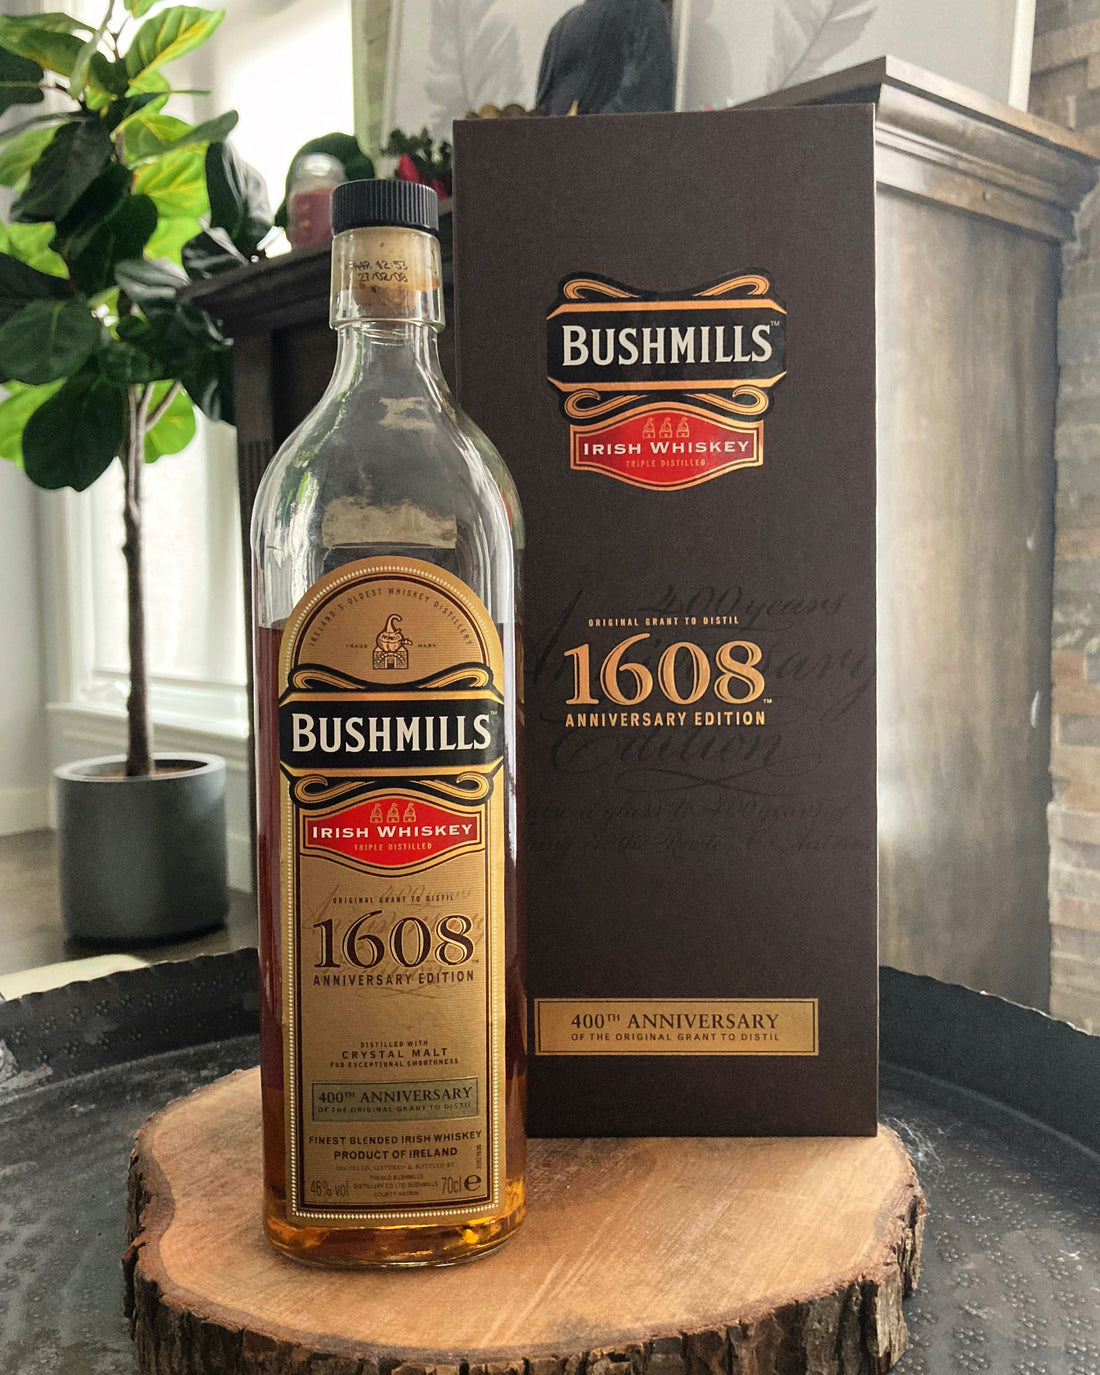 A whiskey 400 years in the making!